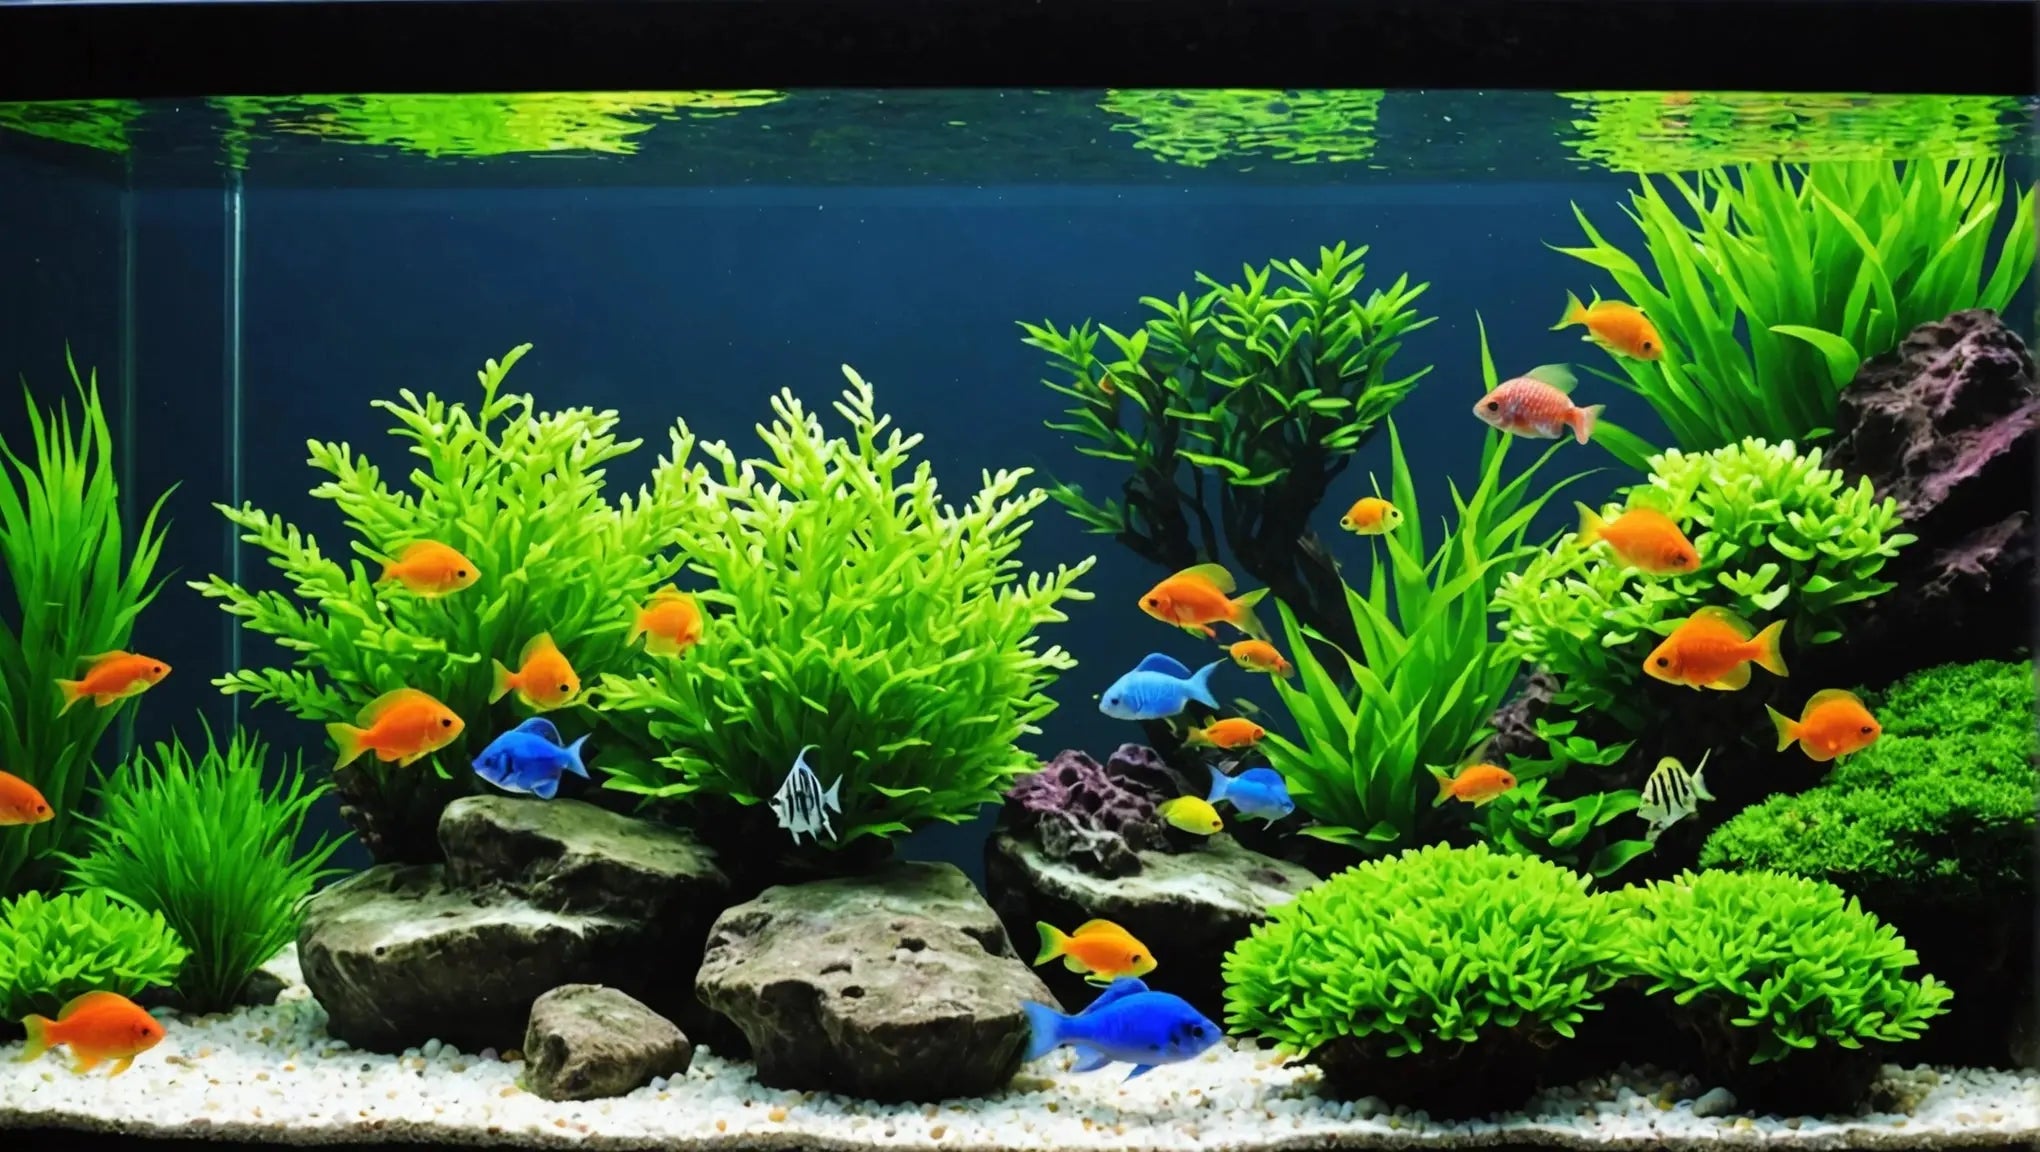 Fish Supplies: Everything You Need for Your Aquarium